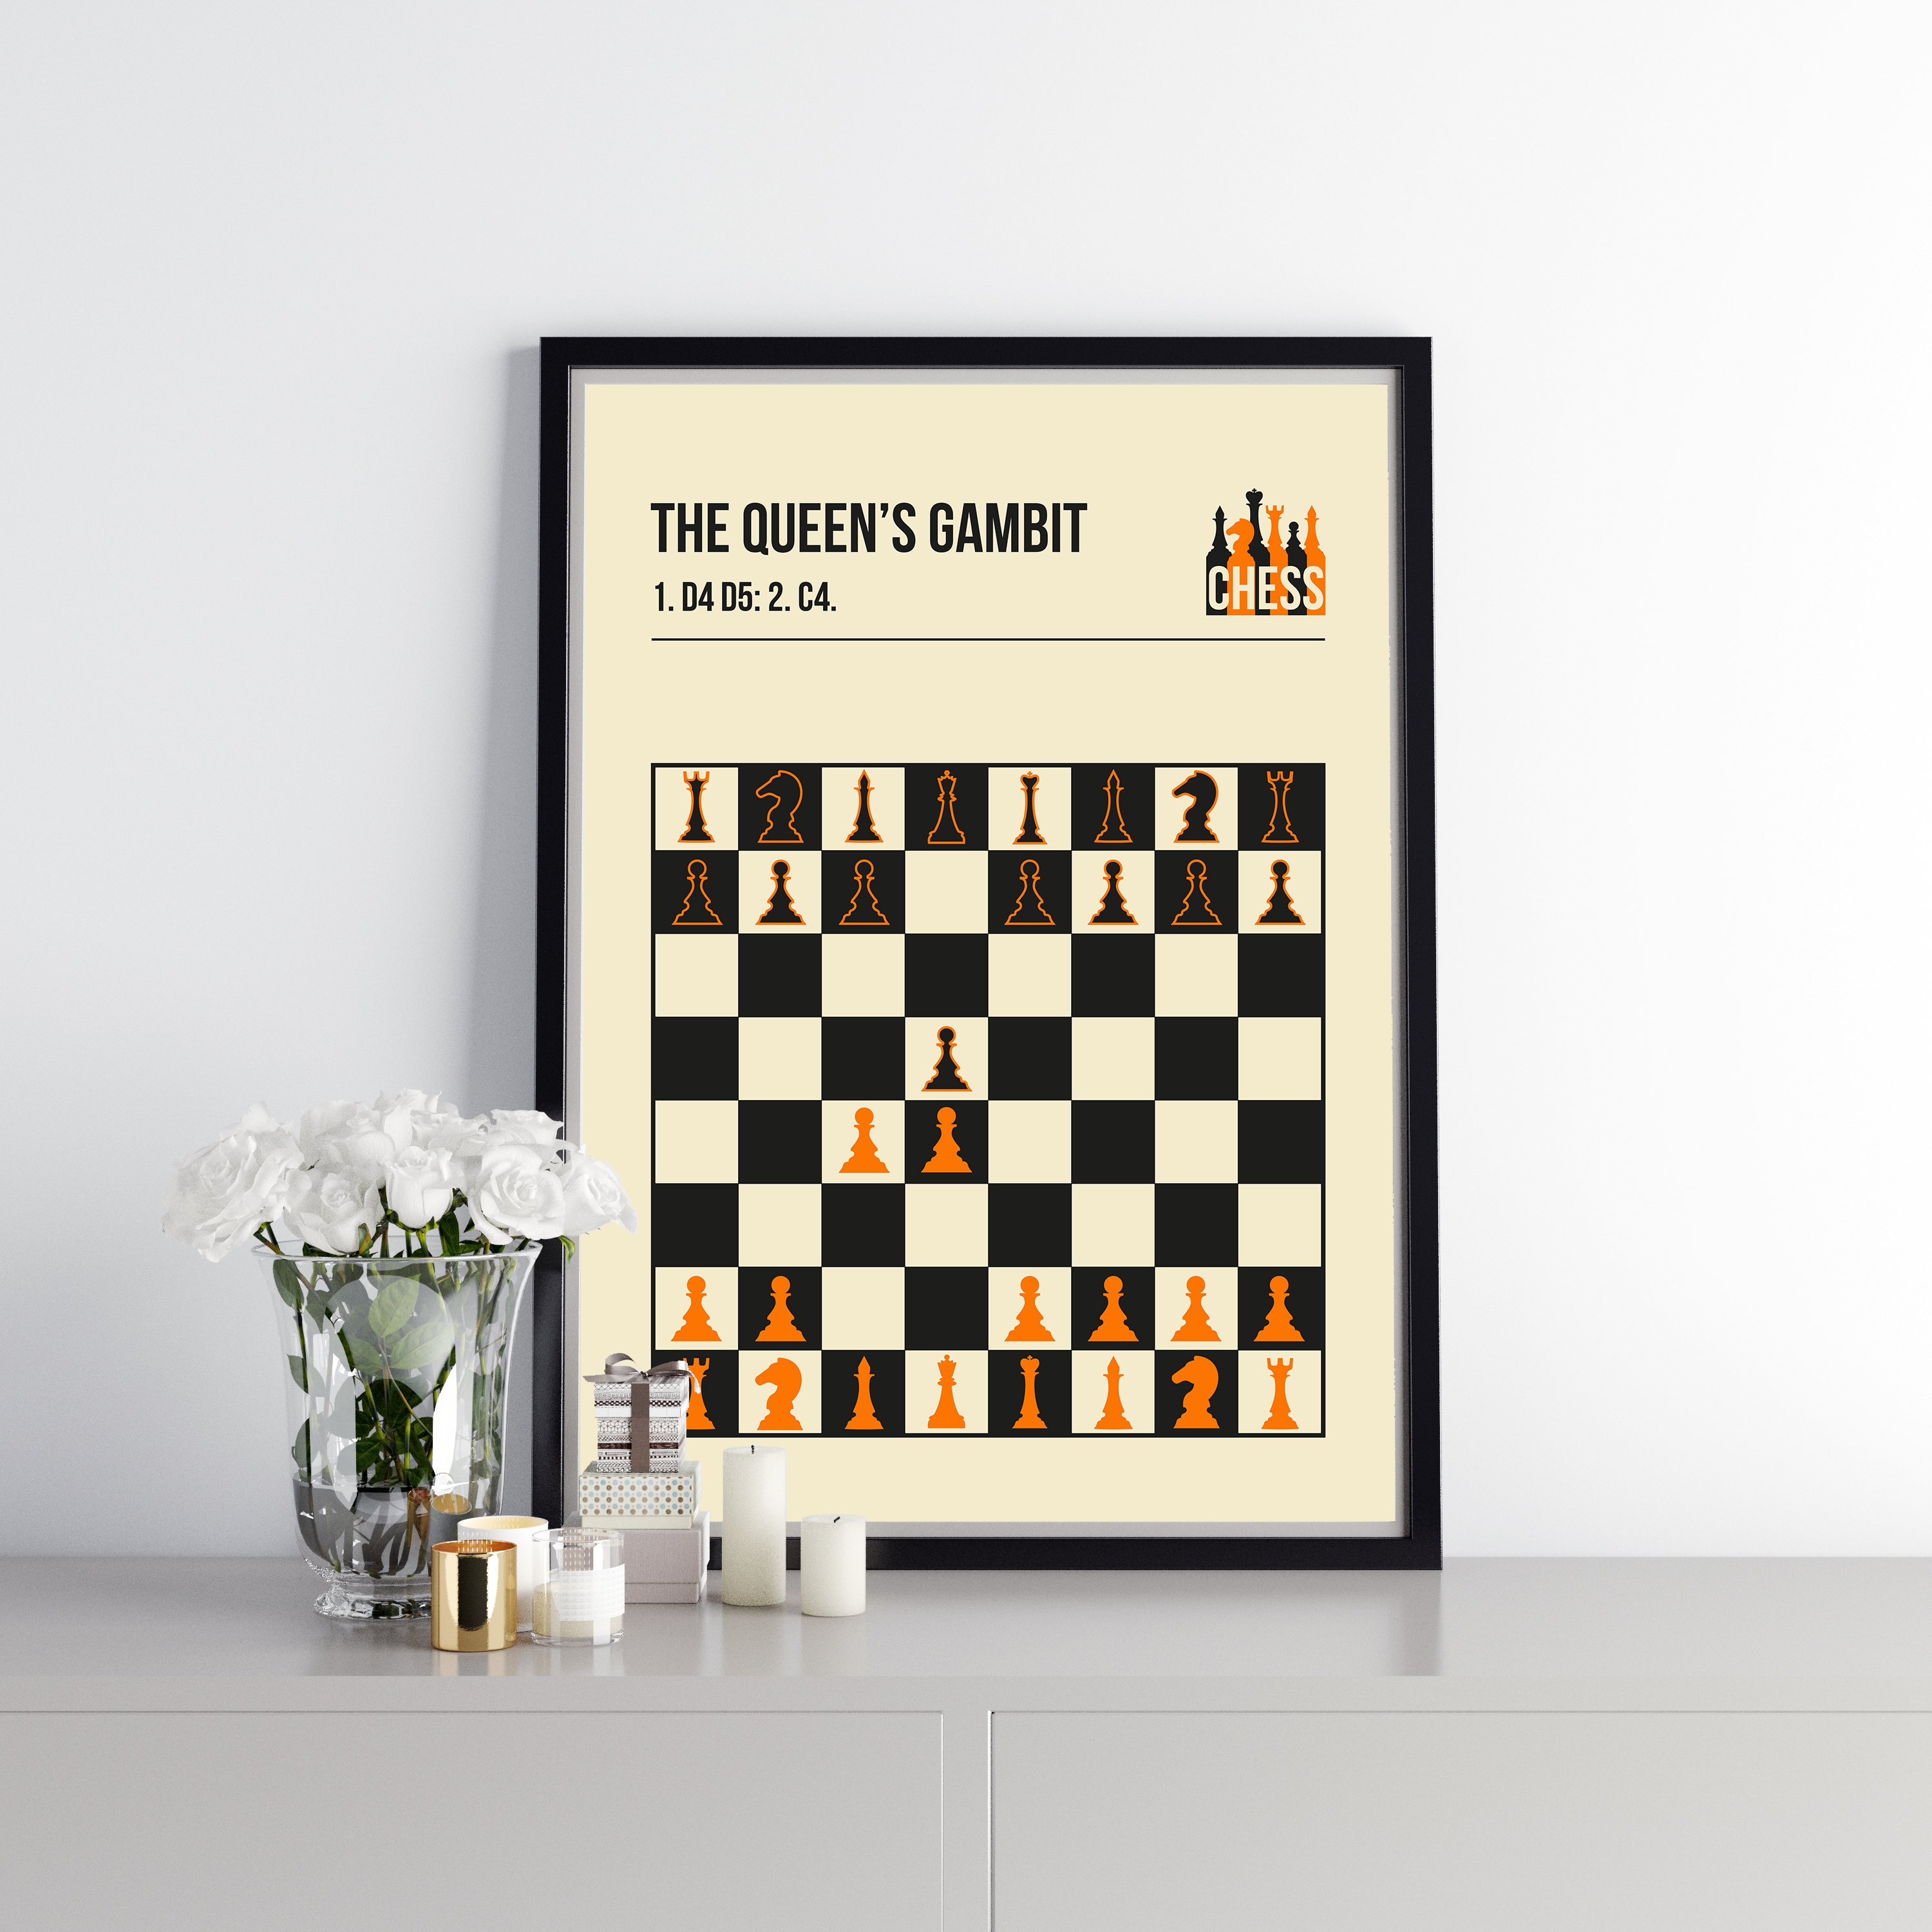 Chess Opening Ruy Lopez Spanish Game Player 1.E4 Art Board Print